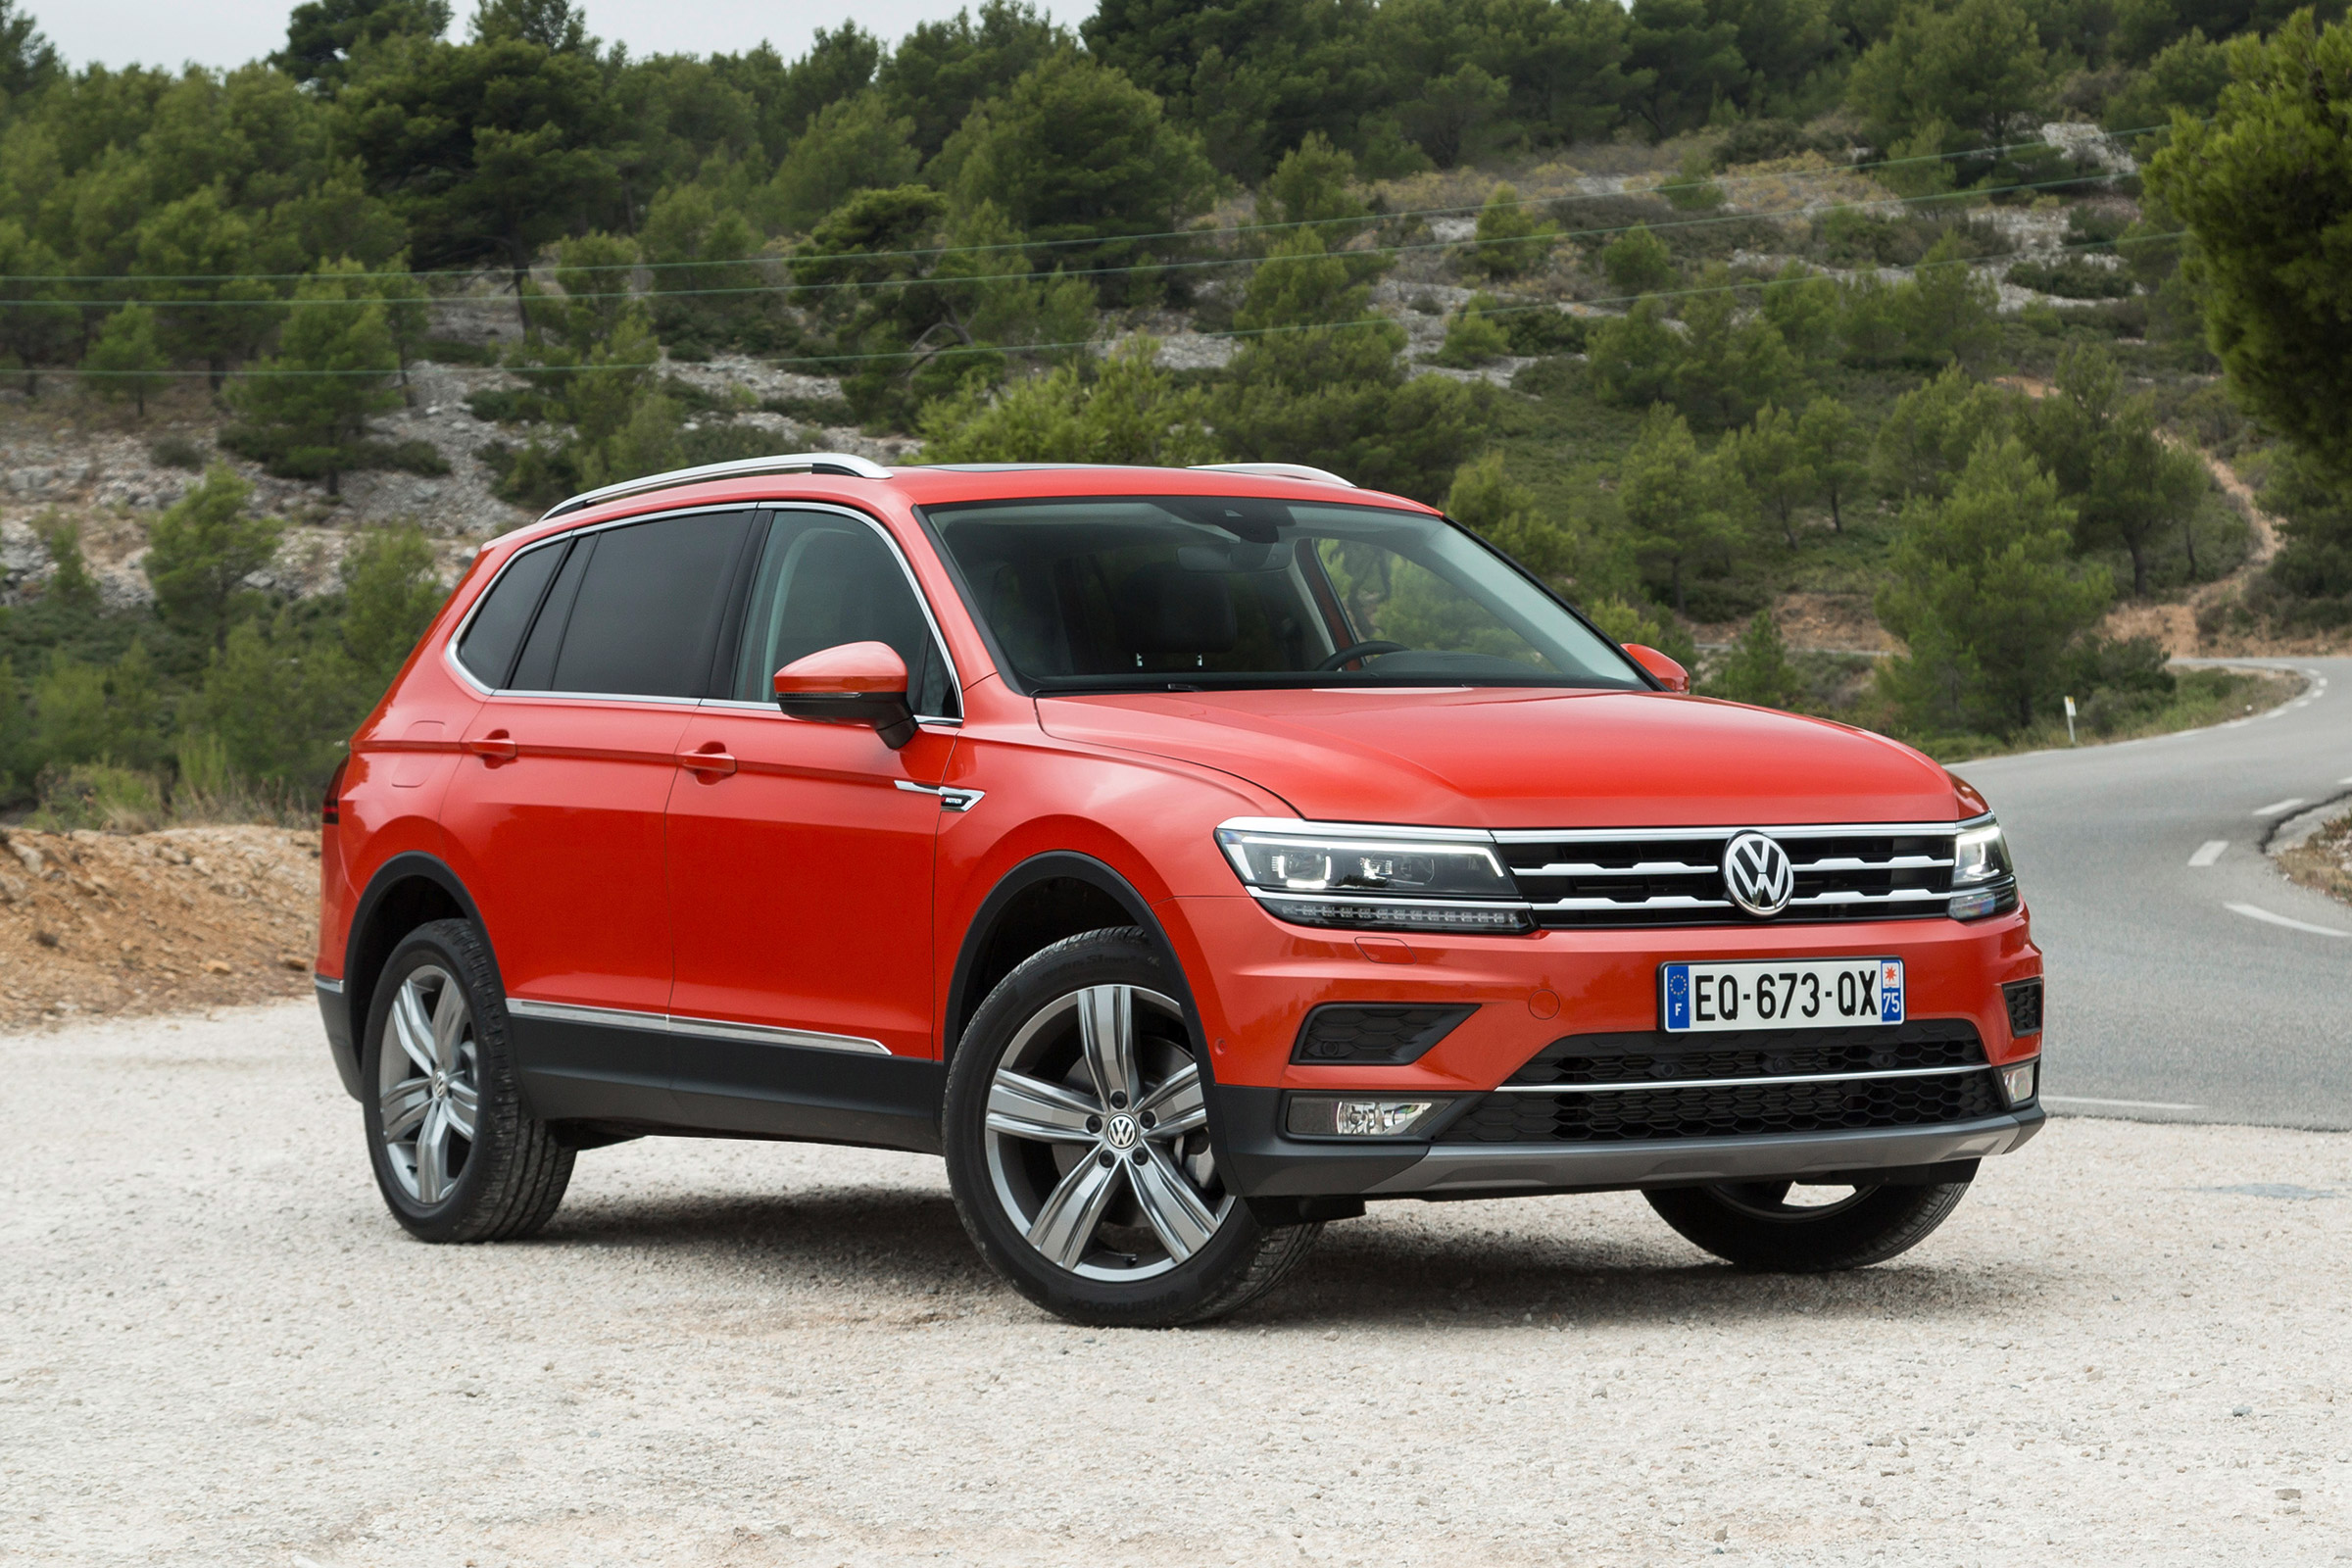 New Volkswagen Tiguan Allspace on sale now from £29,370